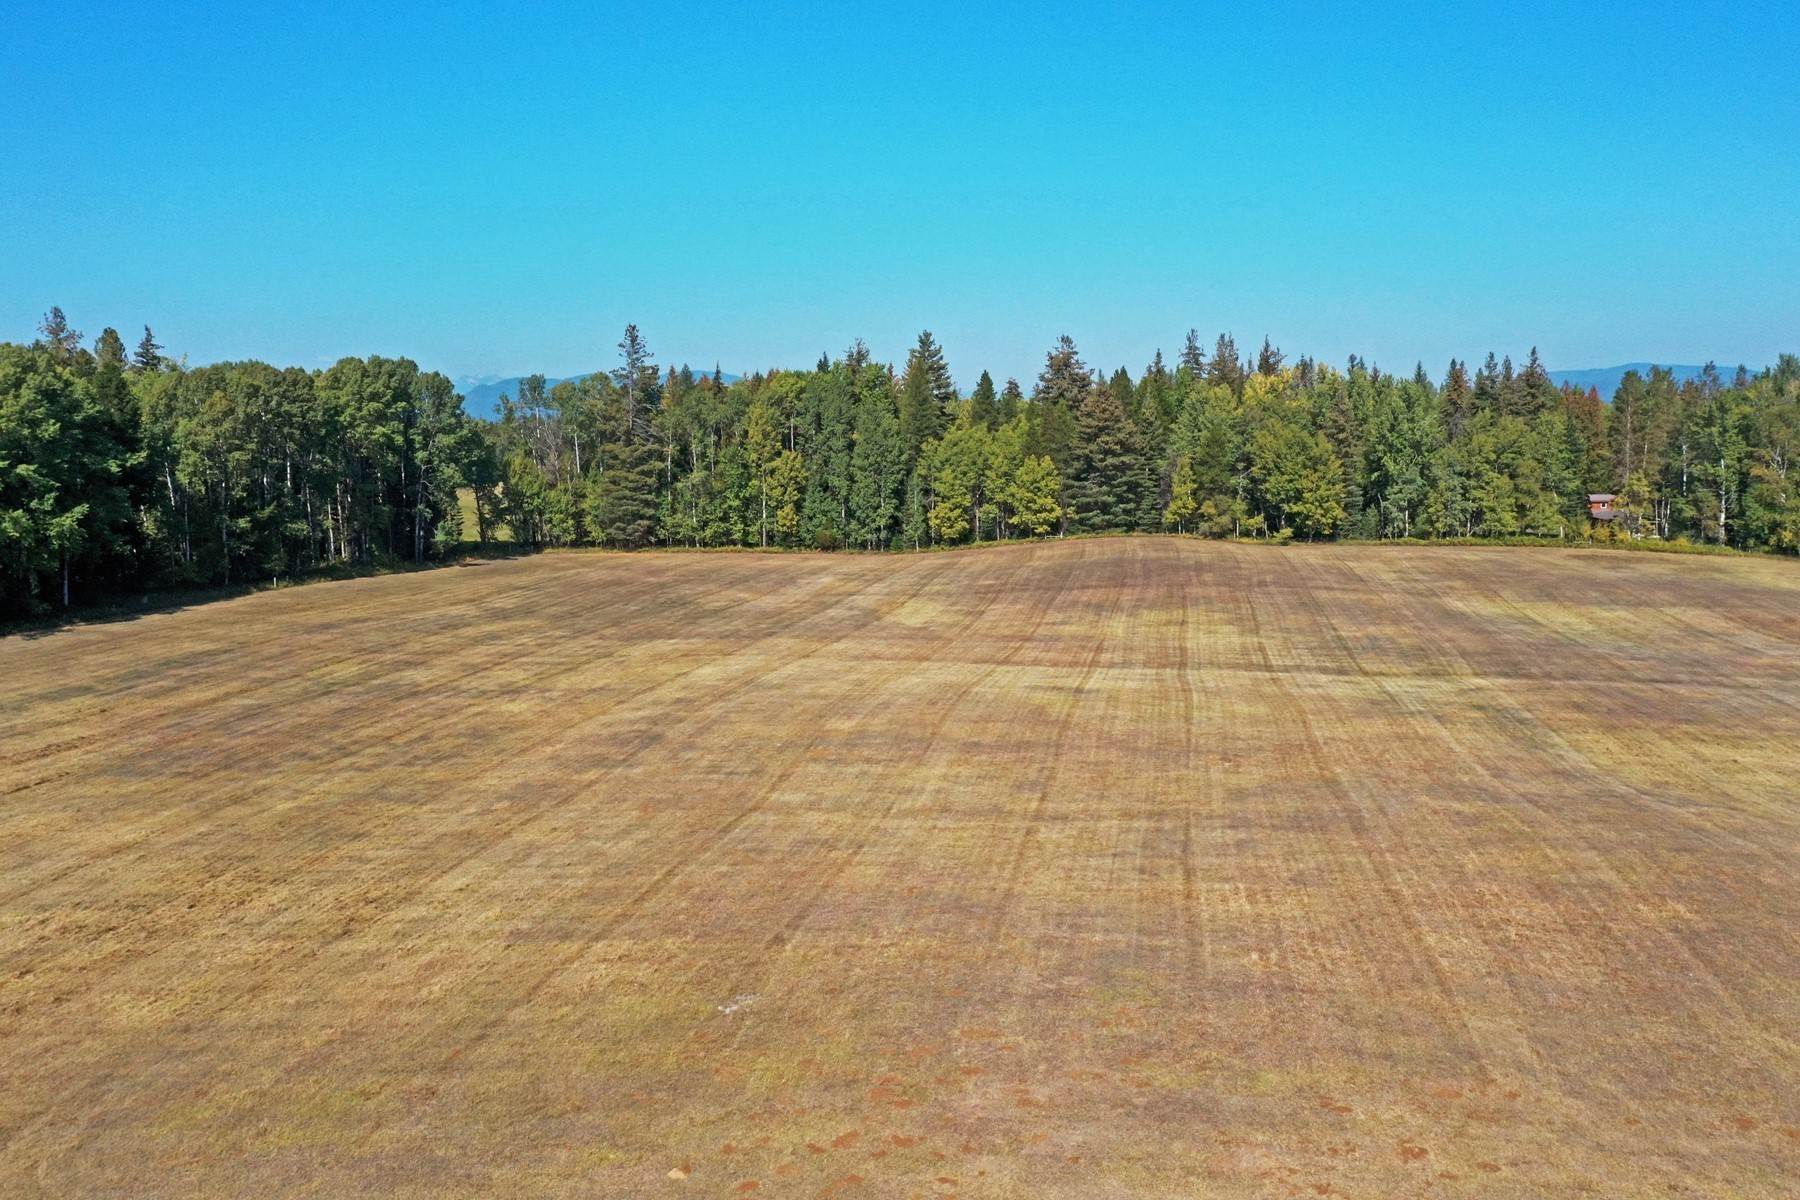 5. Land for Sale at 290 Farmer Dr, Sandpoint, ID 83864 290 Farmer Dr Sandpoint, Idaho 83864 United States